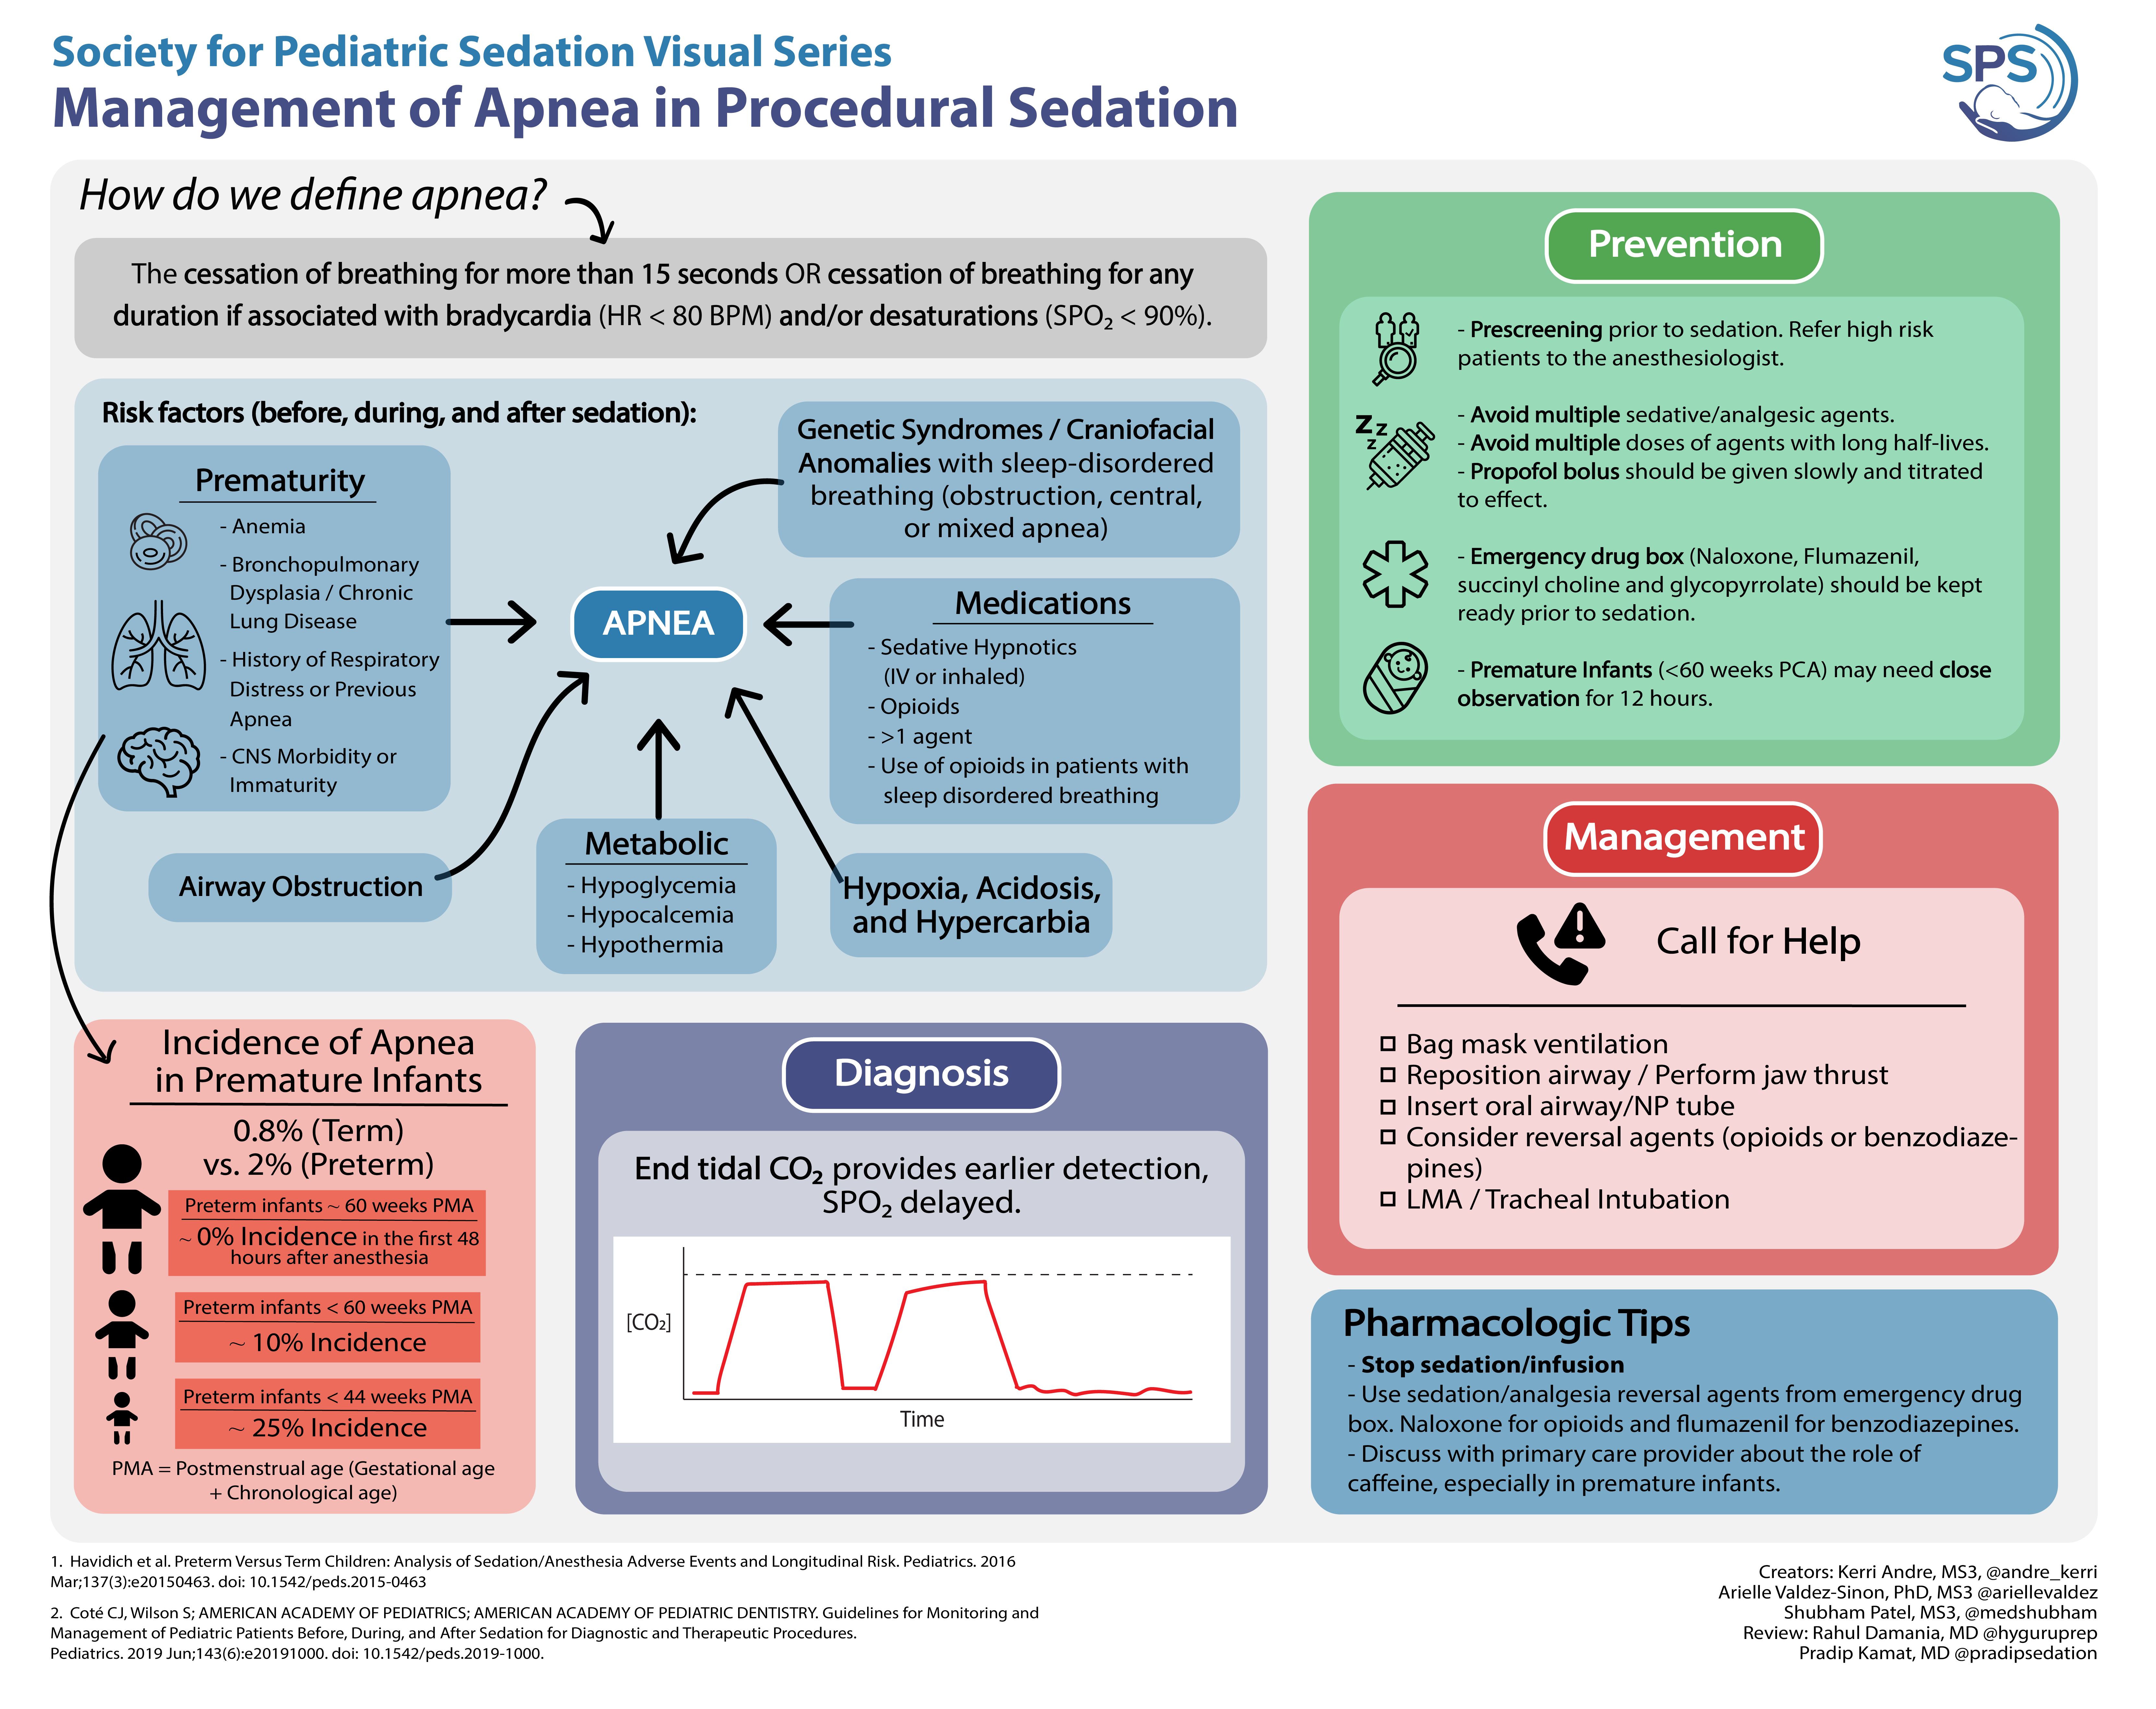 aapd poster presentation 2022